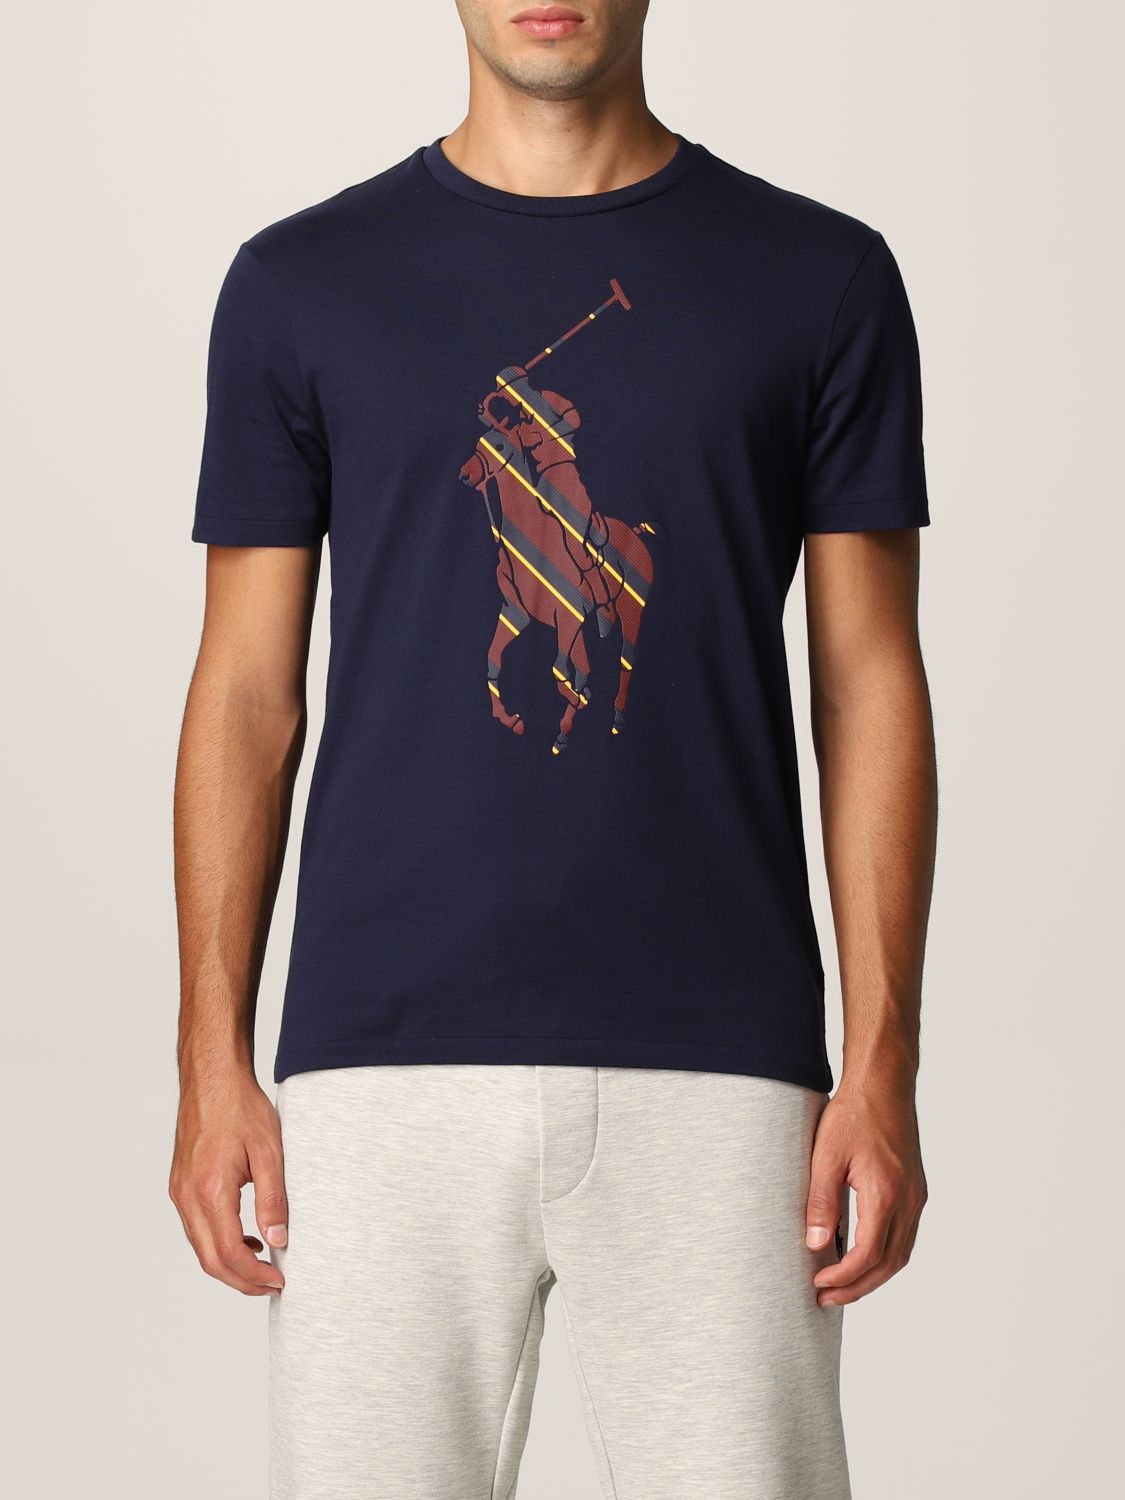 POLO RALPH LAUREN: cotton t-shirt with pony | T-Shirt Polo Lauren Navy | Polo Ralph Lauren GIGLIO.COM